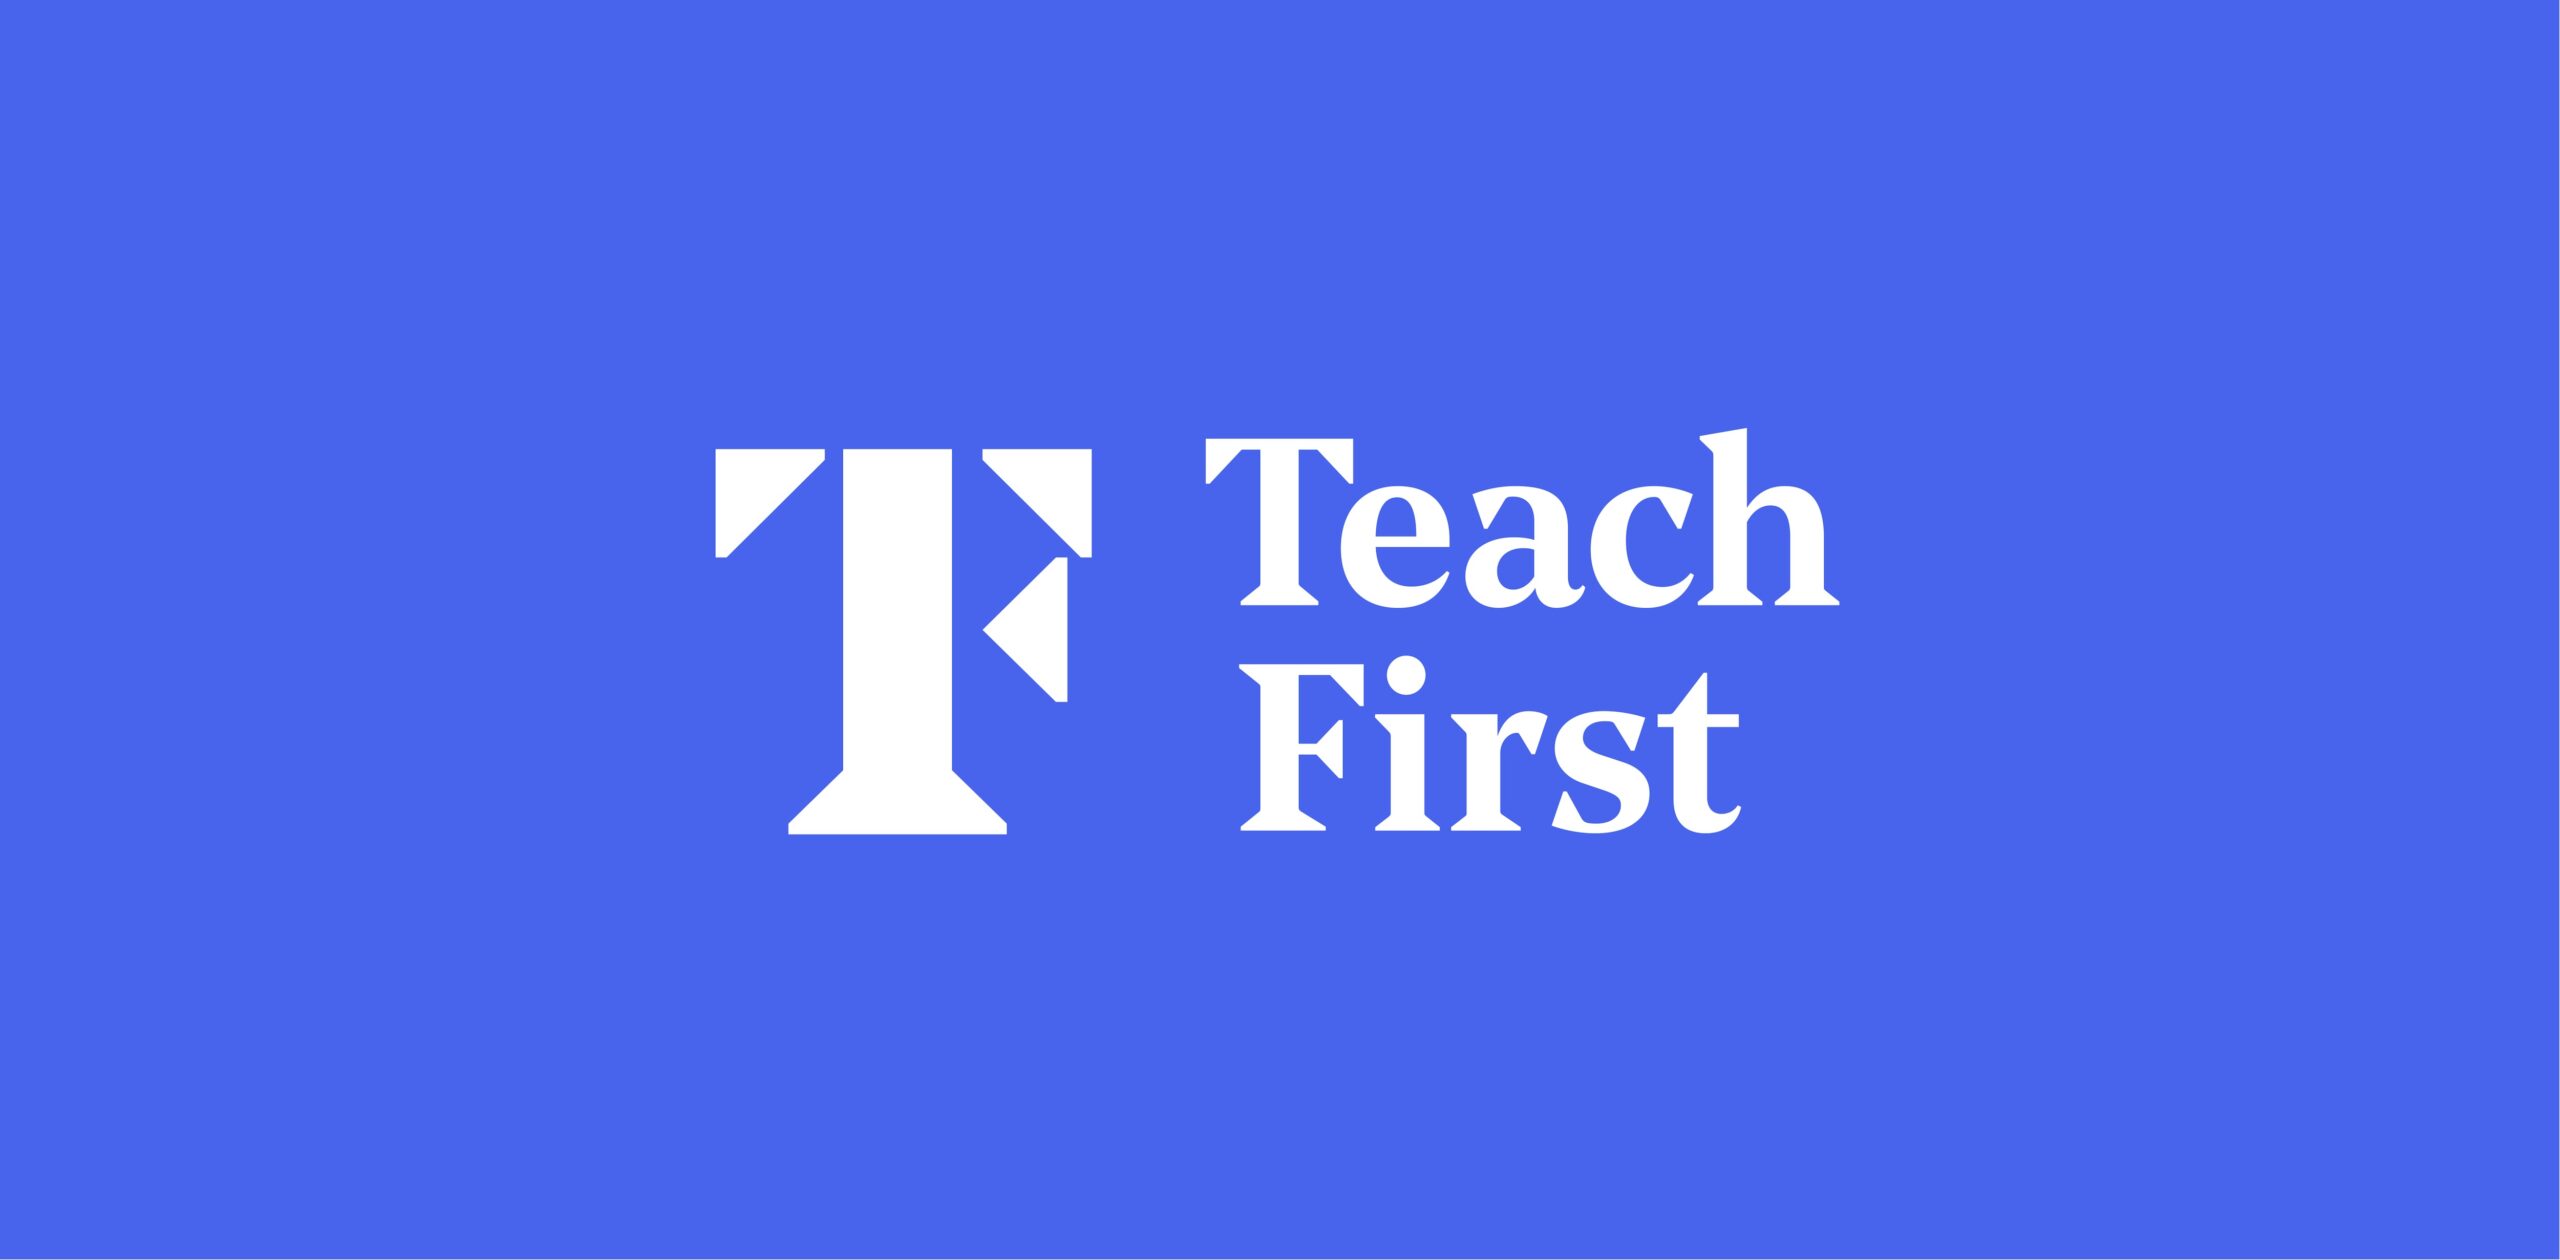 We are now working in partnership with Teach First!